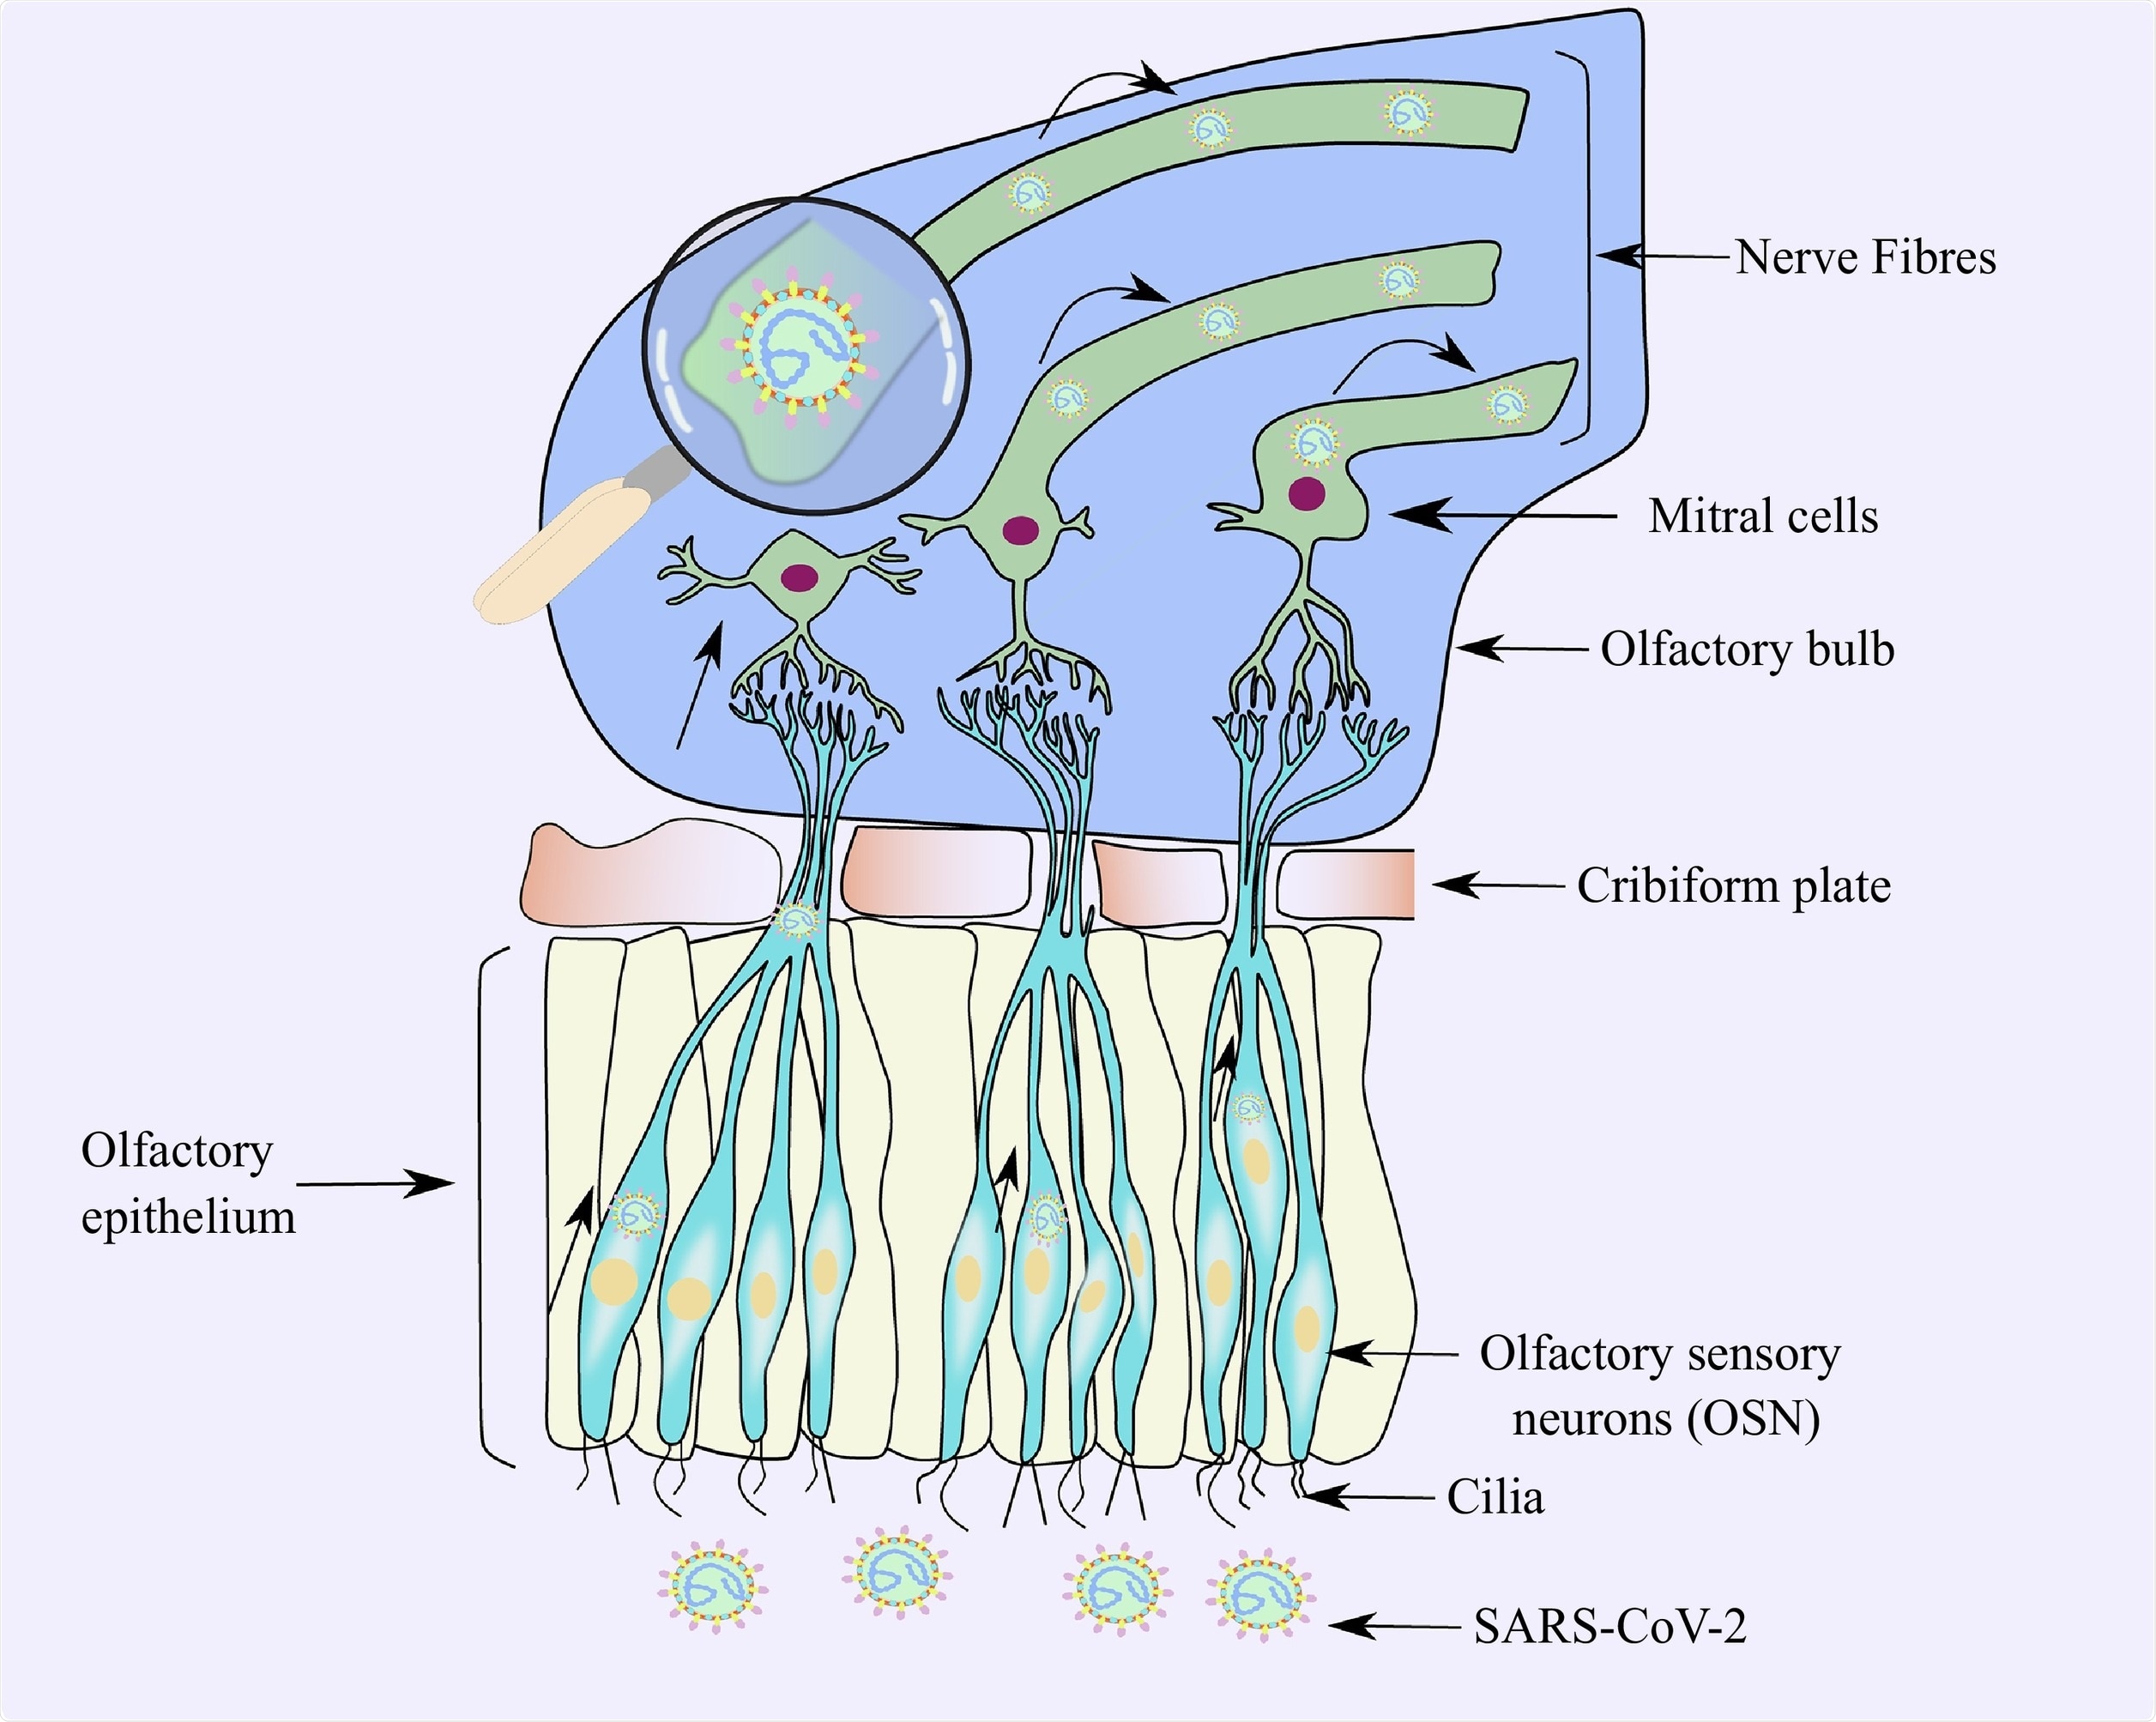 The entry of SARS-CoV-2 in the CNS via the olfactory sensory neurons.